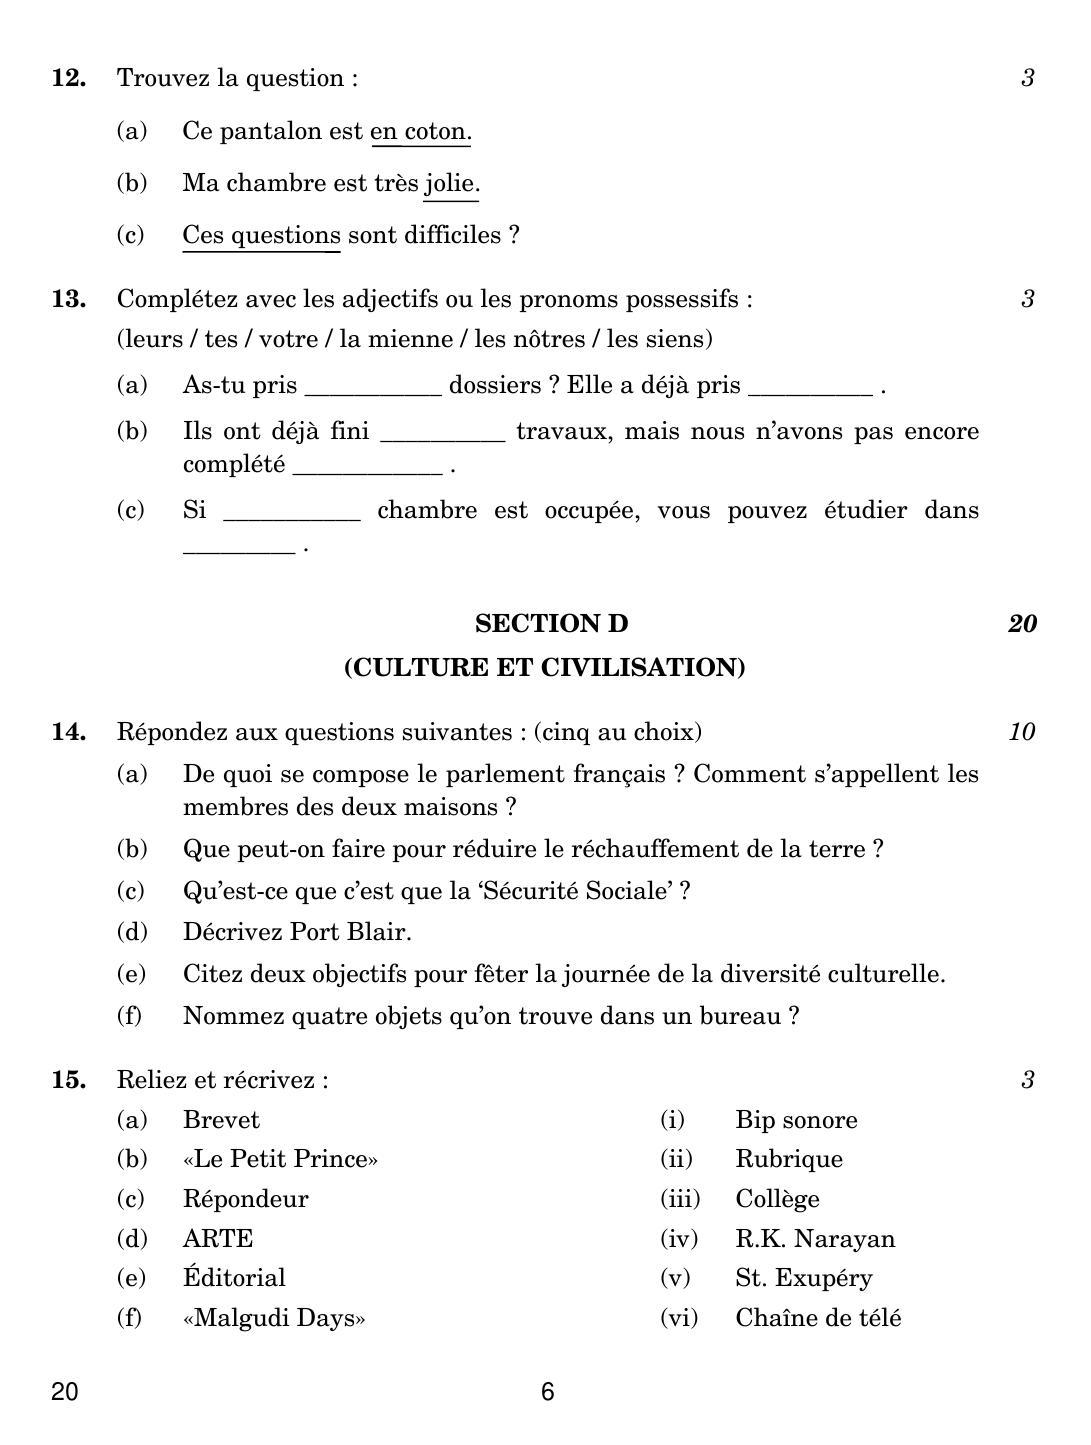 CBSE Class 10 20 French 2019 Compartment Question Paper - Page 6